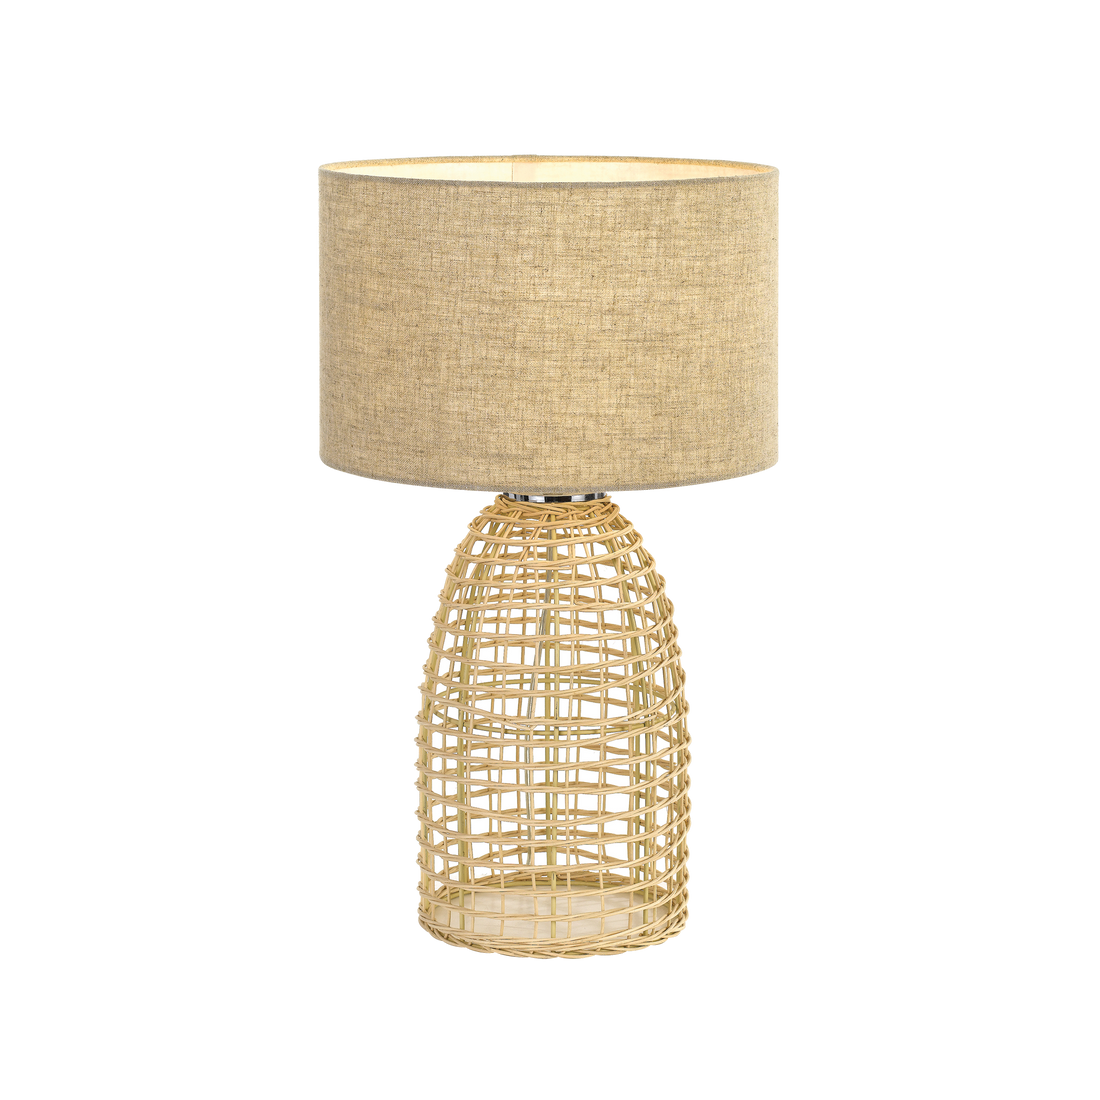 Bayz Small Sand Rattan Bottle Cage Table Lamp